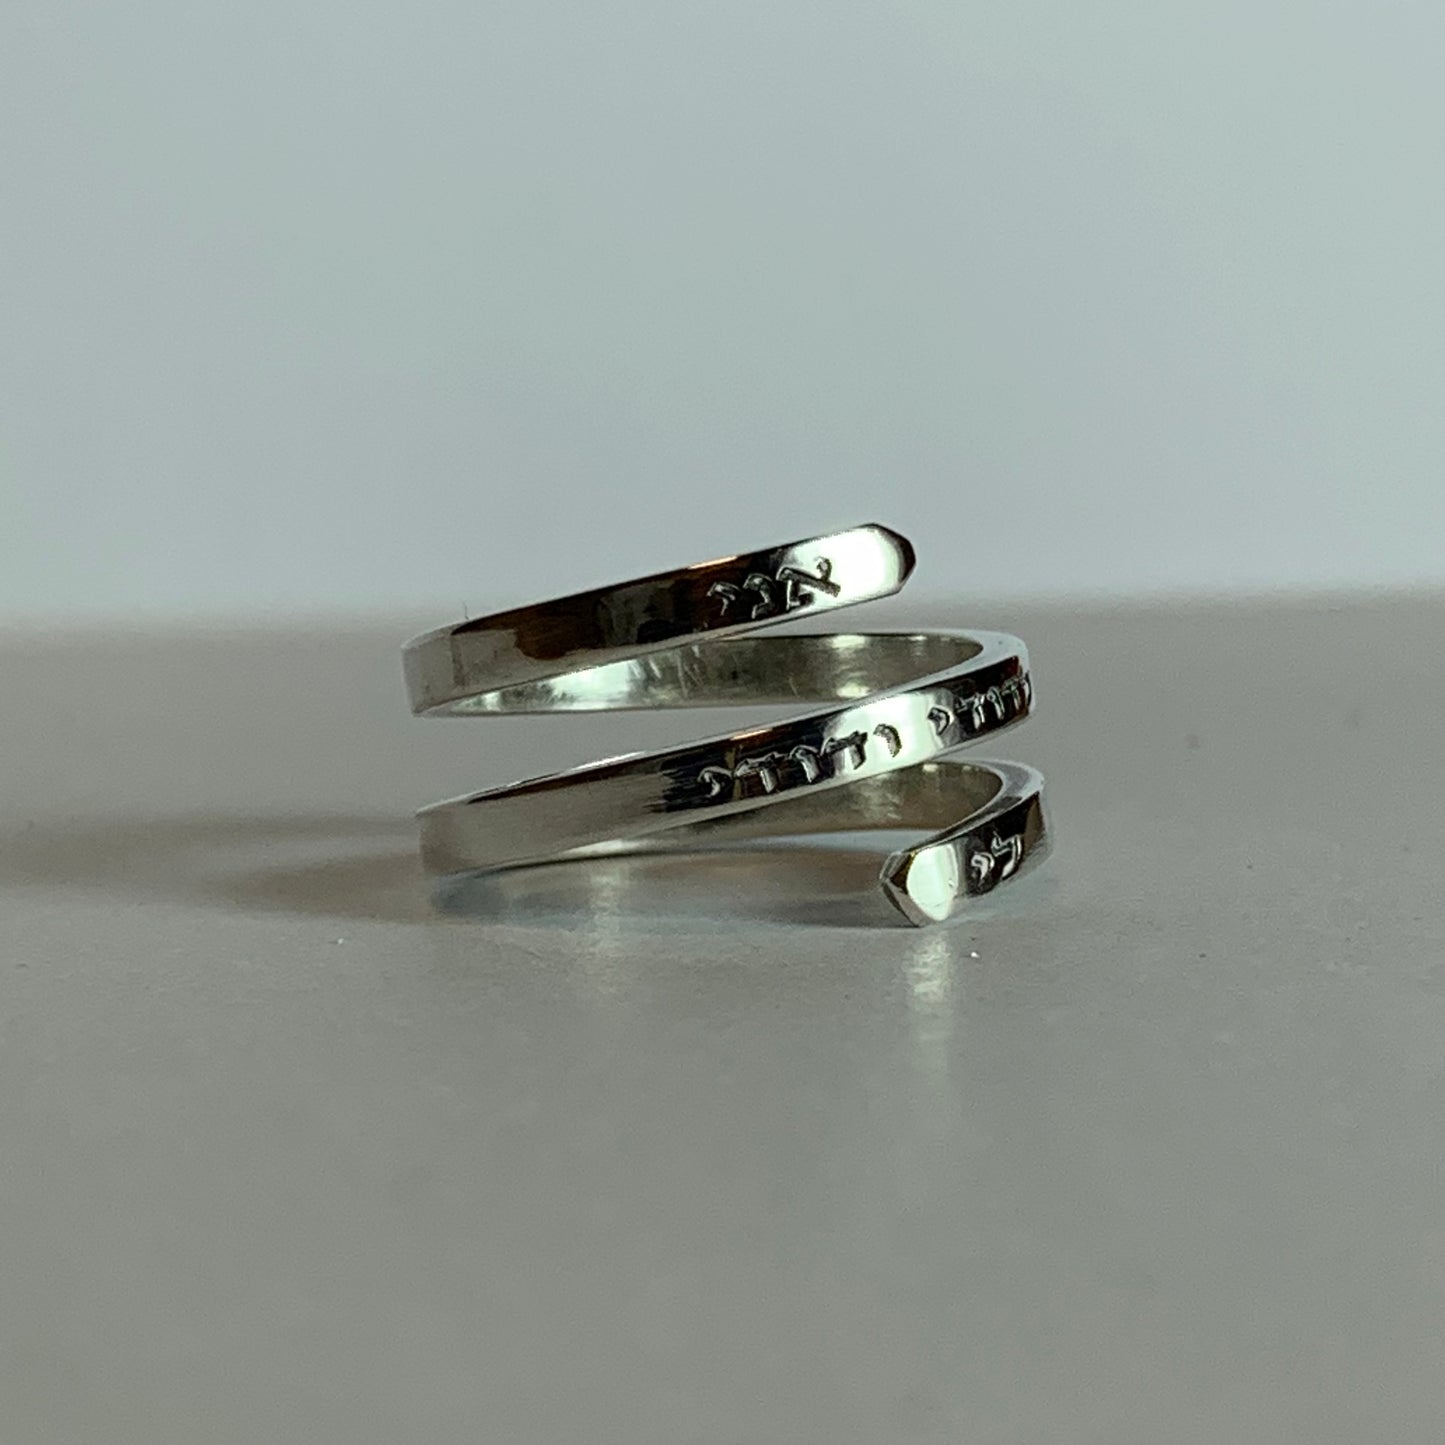 Customized Ring With Quote Silver Ring